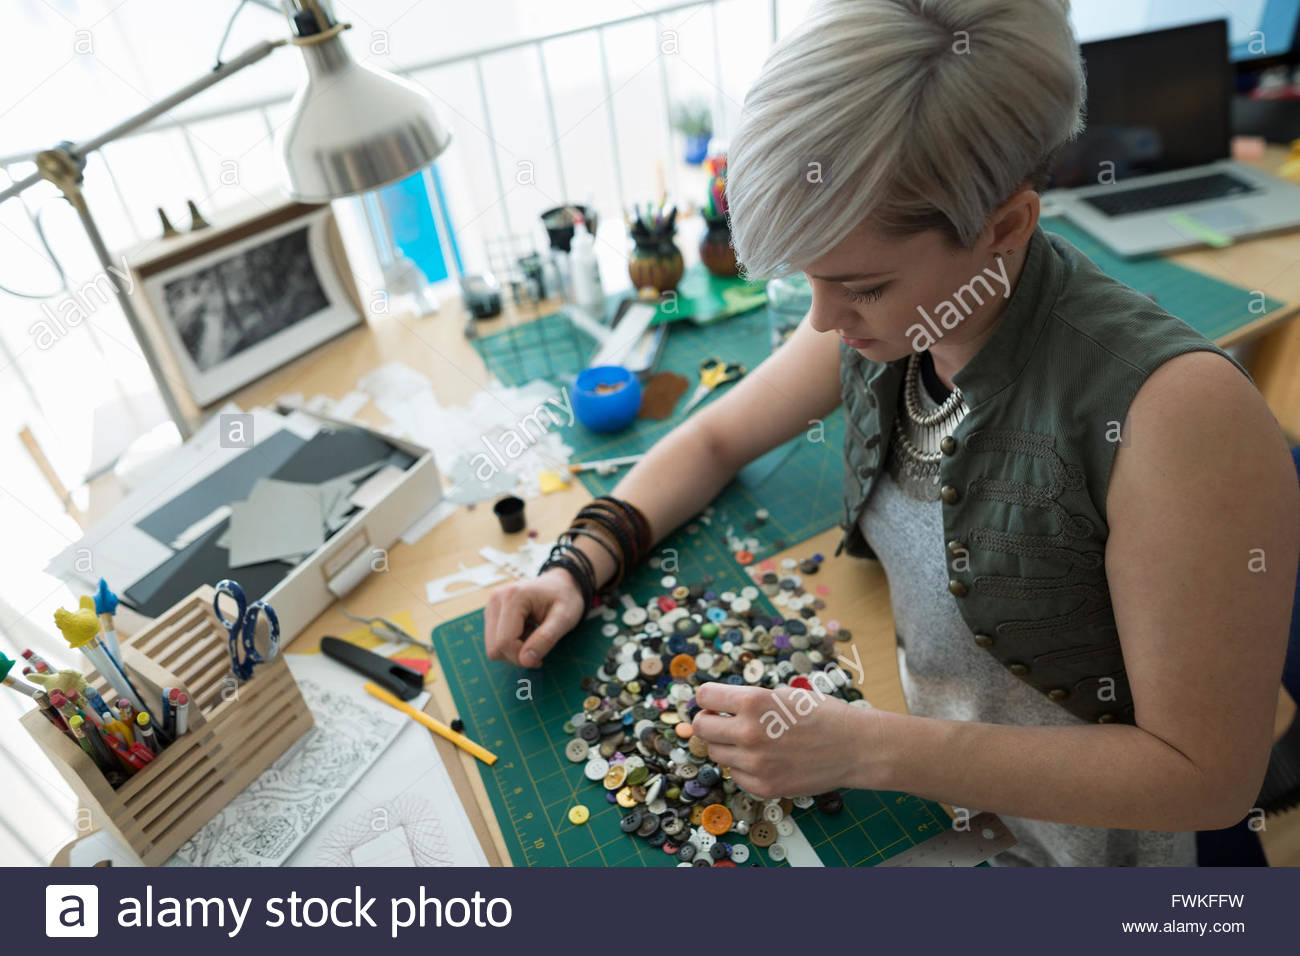 Craftswoman sorting buttons at desk in home office Stock Photo